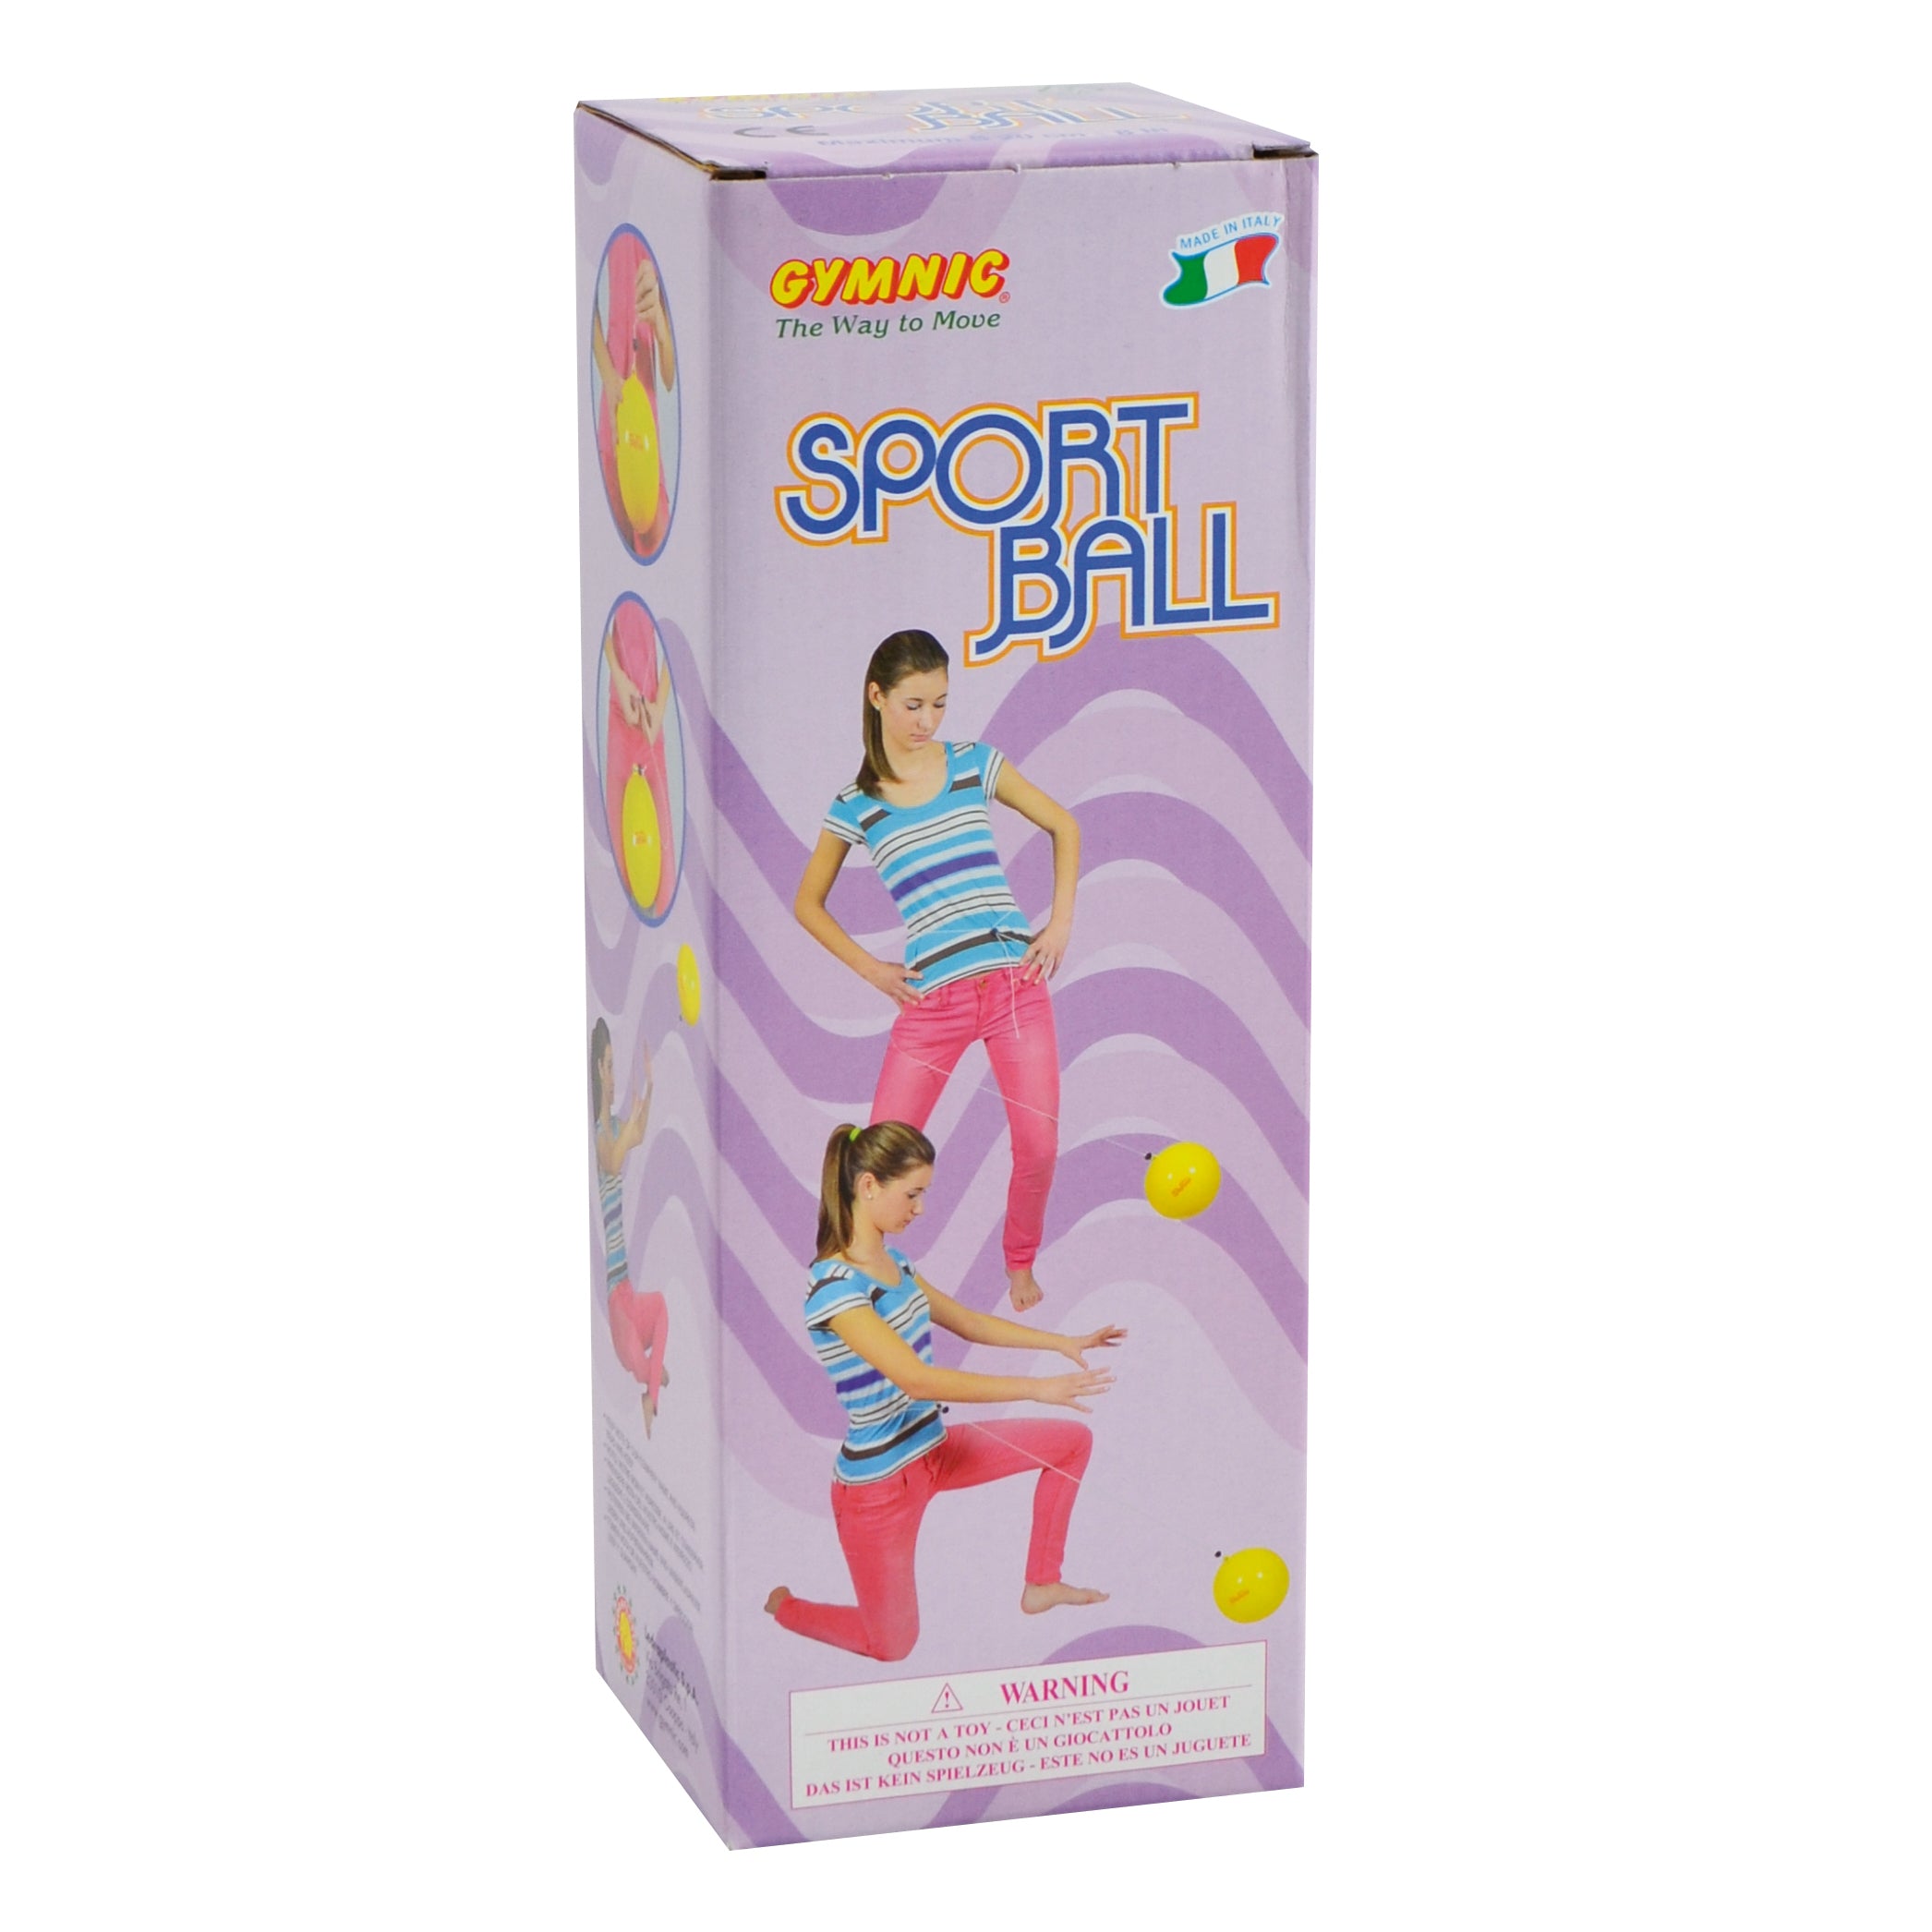 The Sport Ball enhances reflexes and coordination. Use as a training tool for handball, volleyball and Football. It is recommended to tone up arms and legs and increase the pelvis mobility.